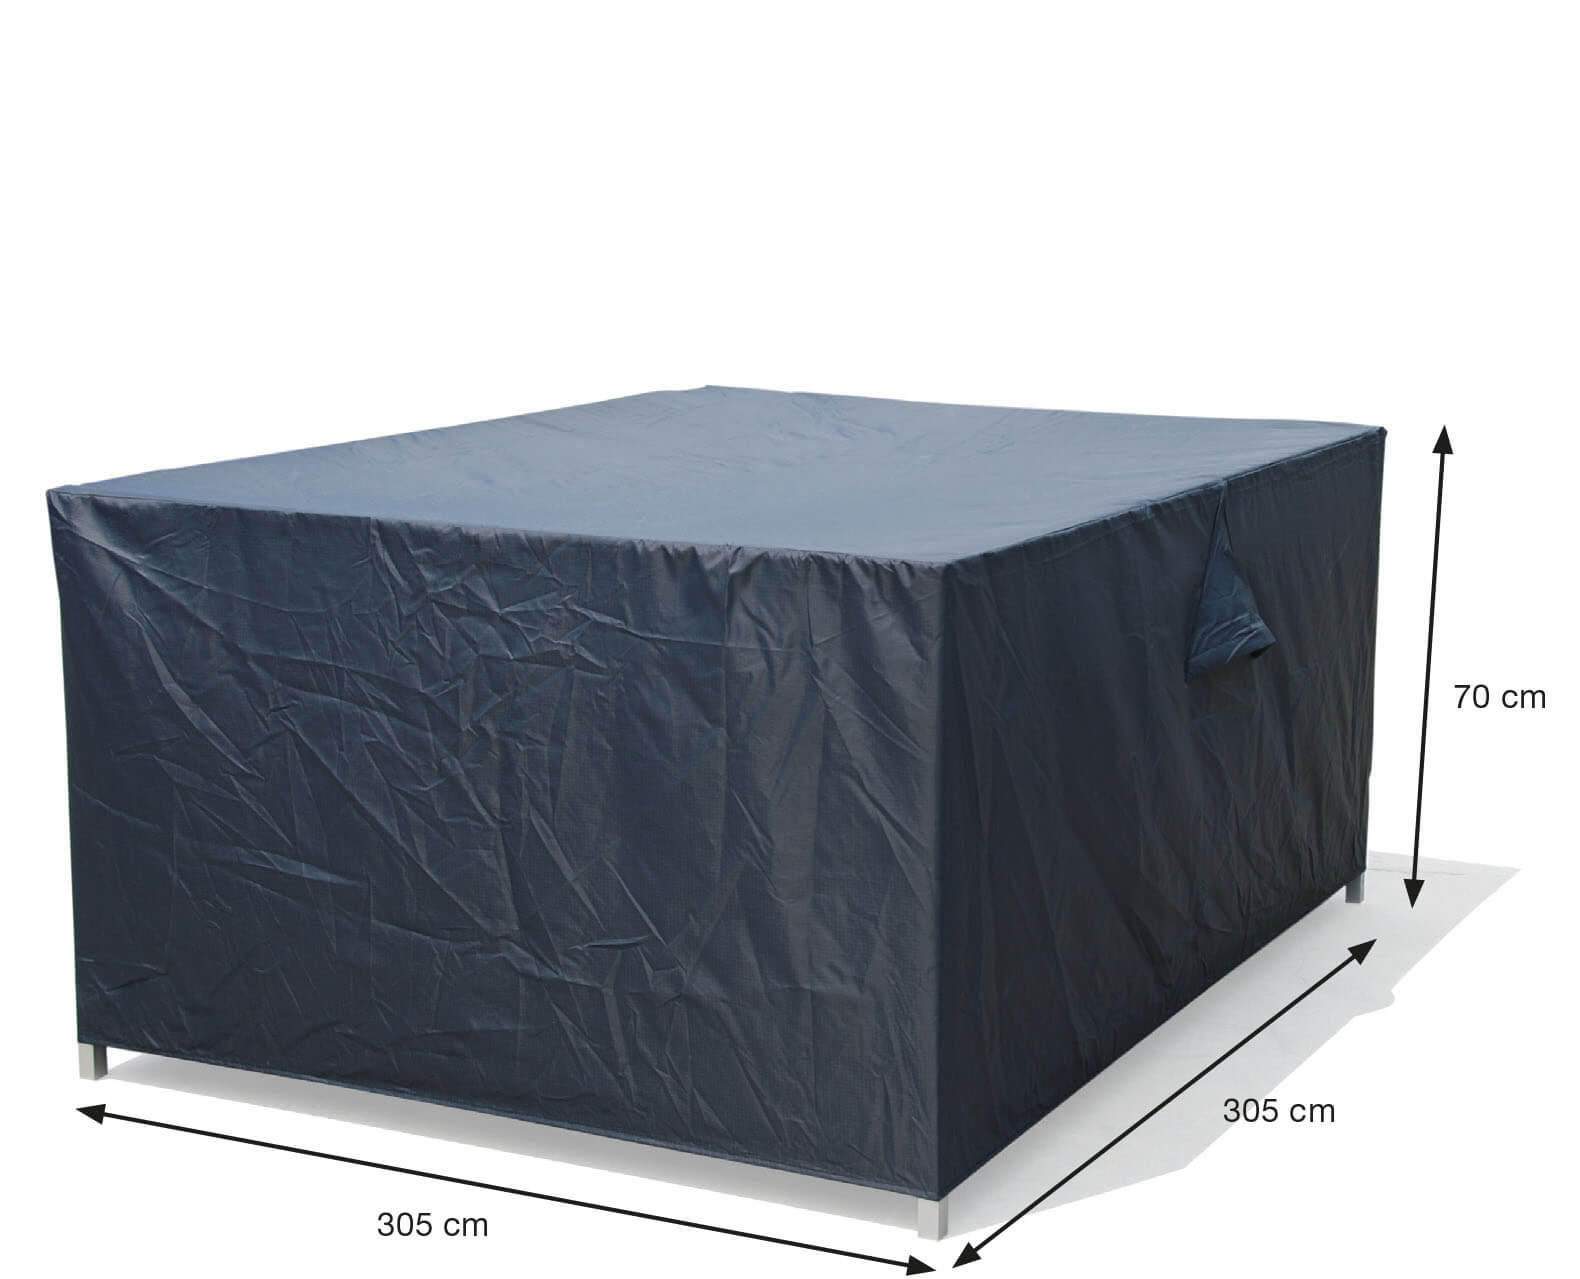 Hoes voor loungesets 305 x 305 H: 70 cm